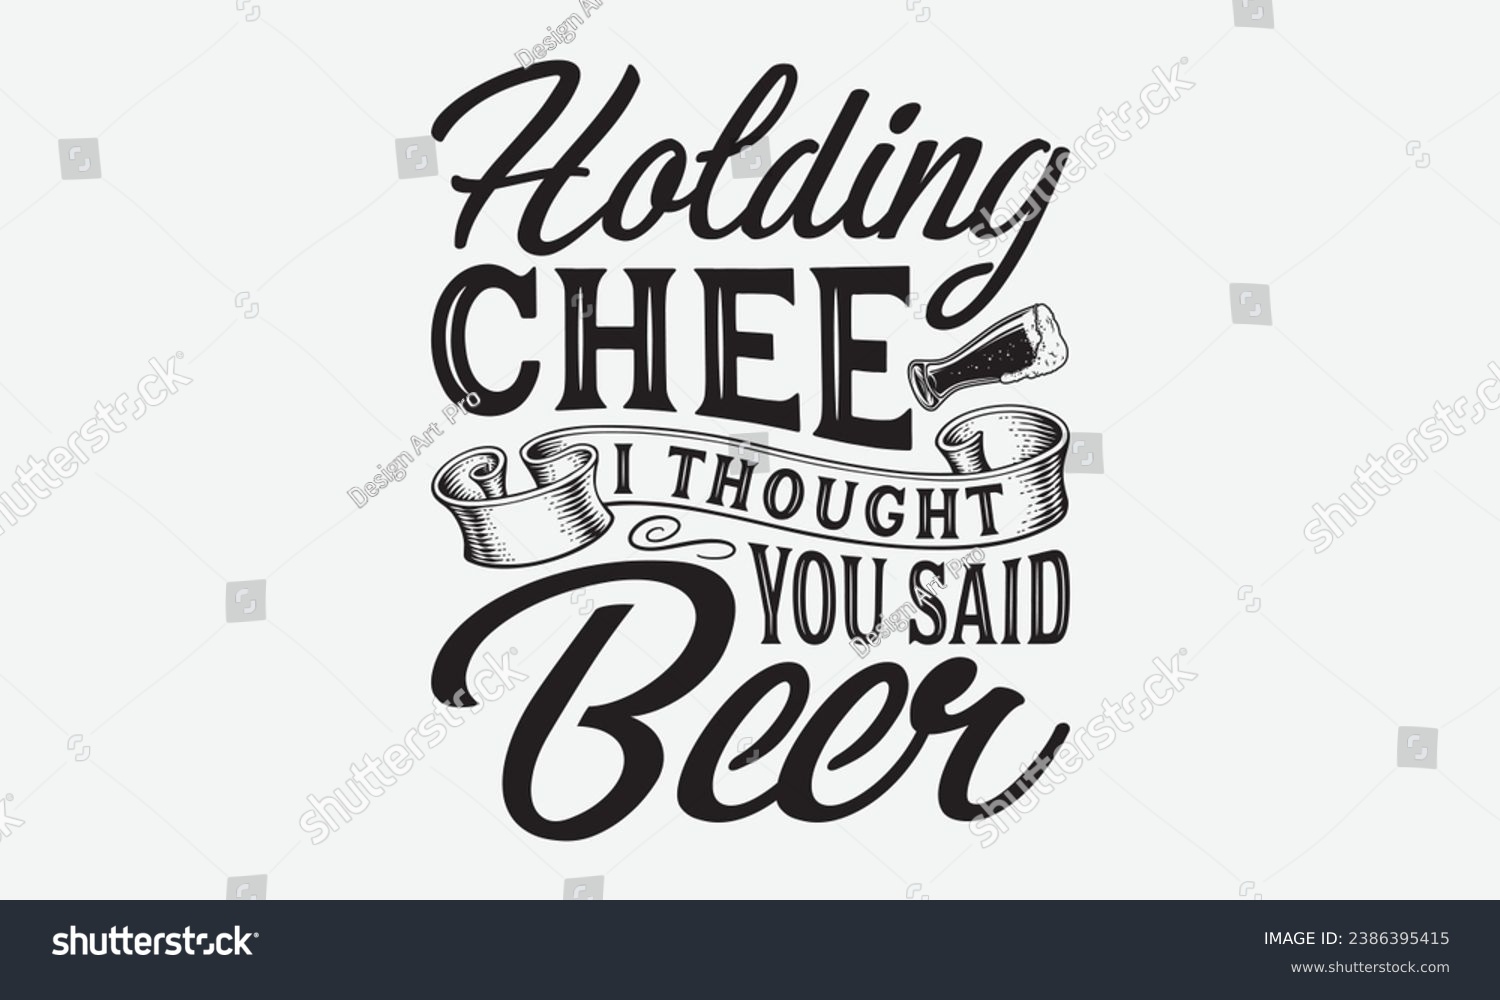 SVG of Holding Cheer I Thought You Said Beer -Beer T-Shirt Design, Handmade Calligraphy Vector Illustration, Hand Drawn Lettering Phrase, For Cutting Machine, Silhouette Cameo, Cricut. svg